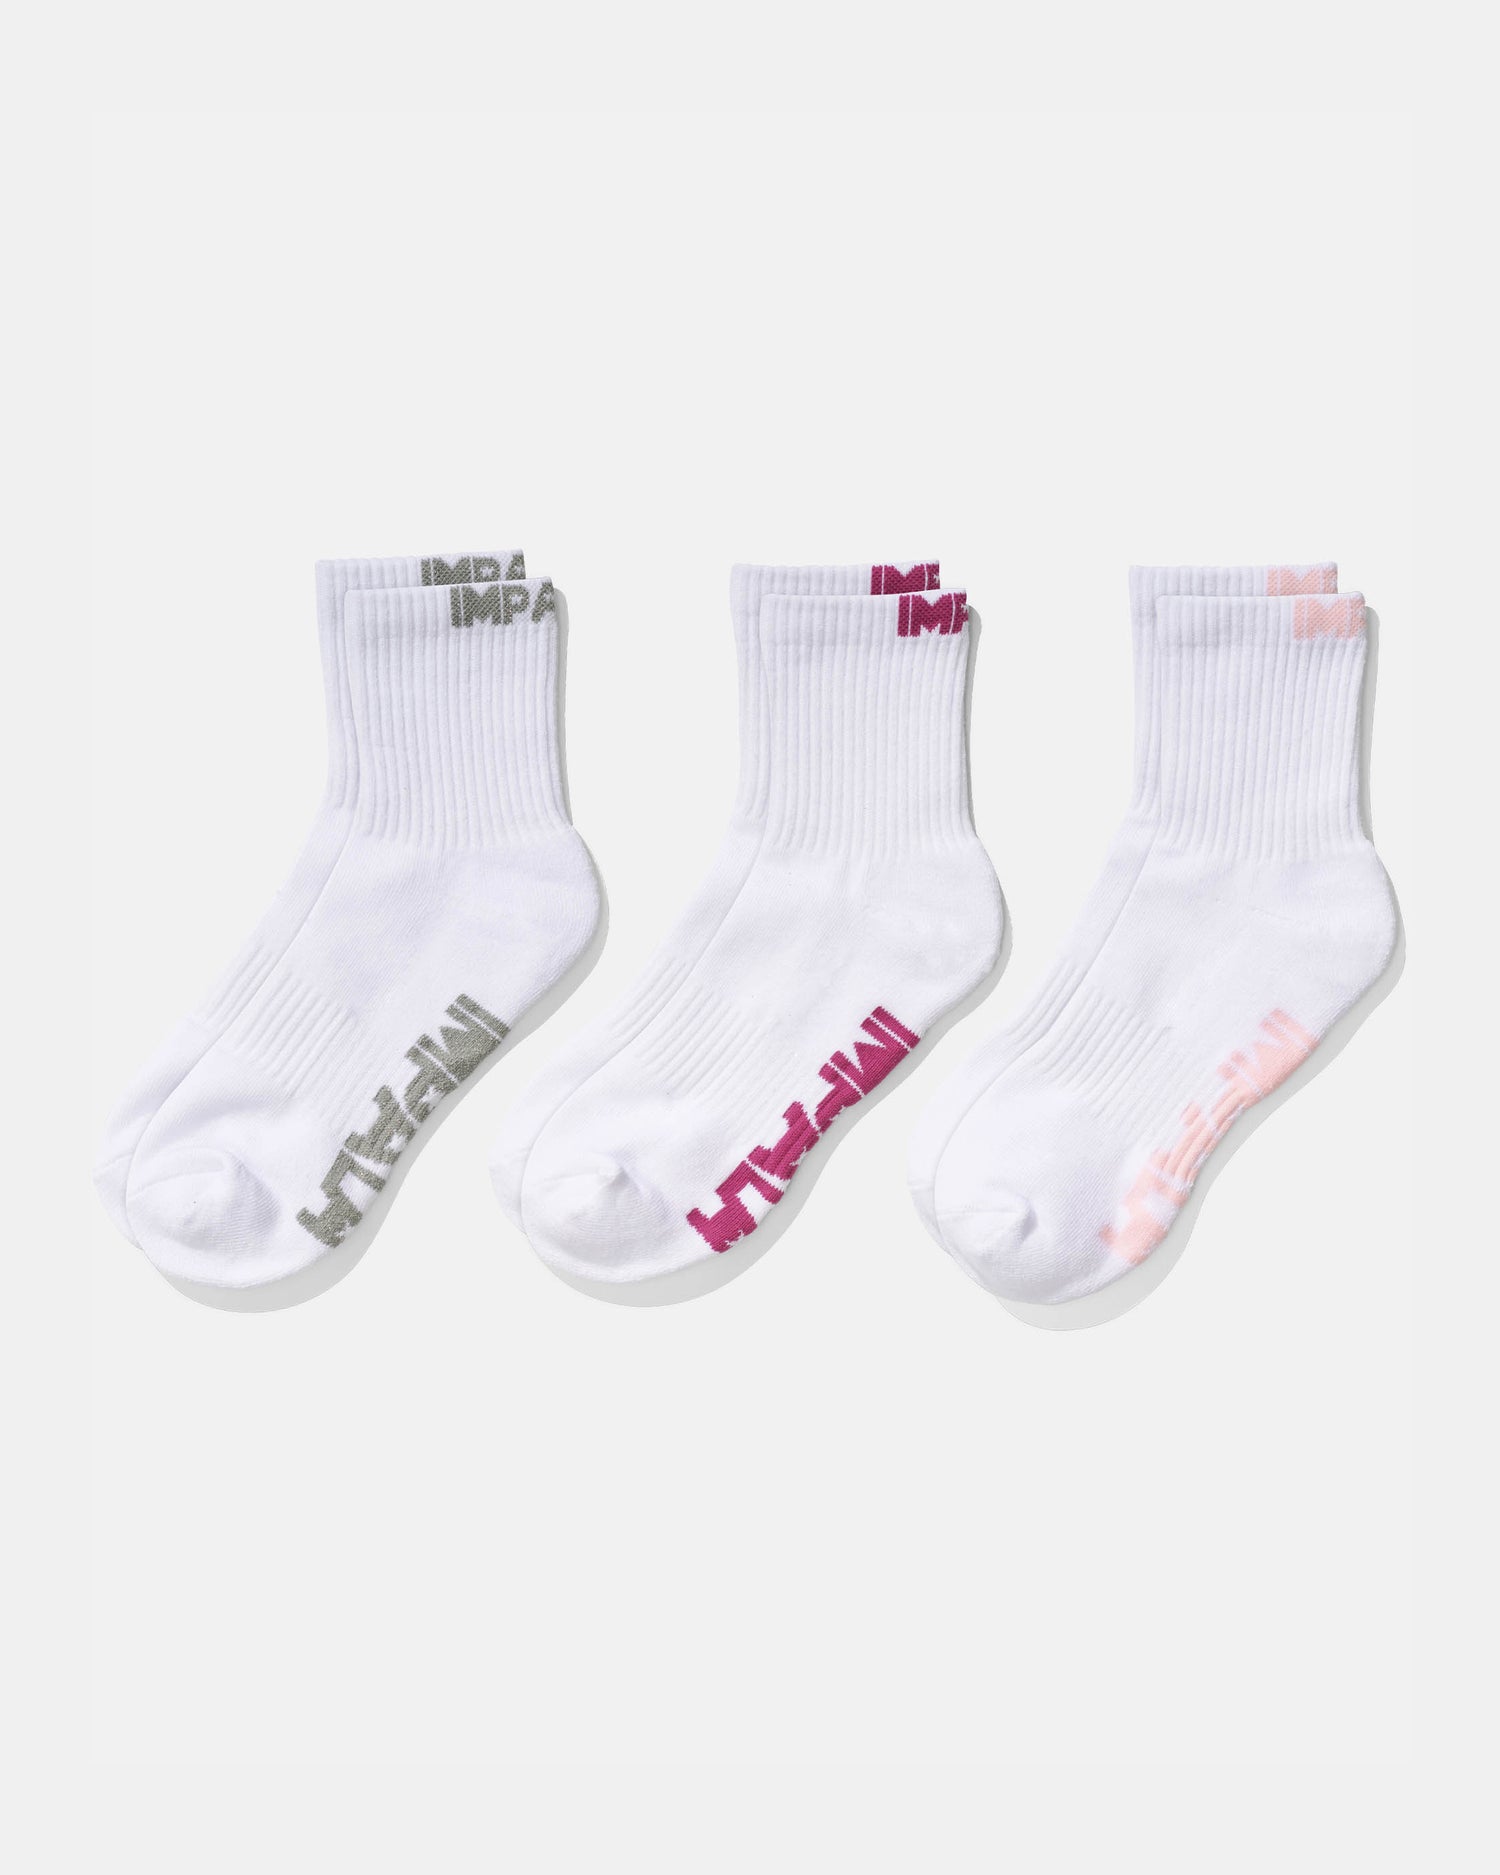 3 pair of White Impala Everyday Sock showing grey, maroon and peach logo